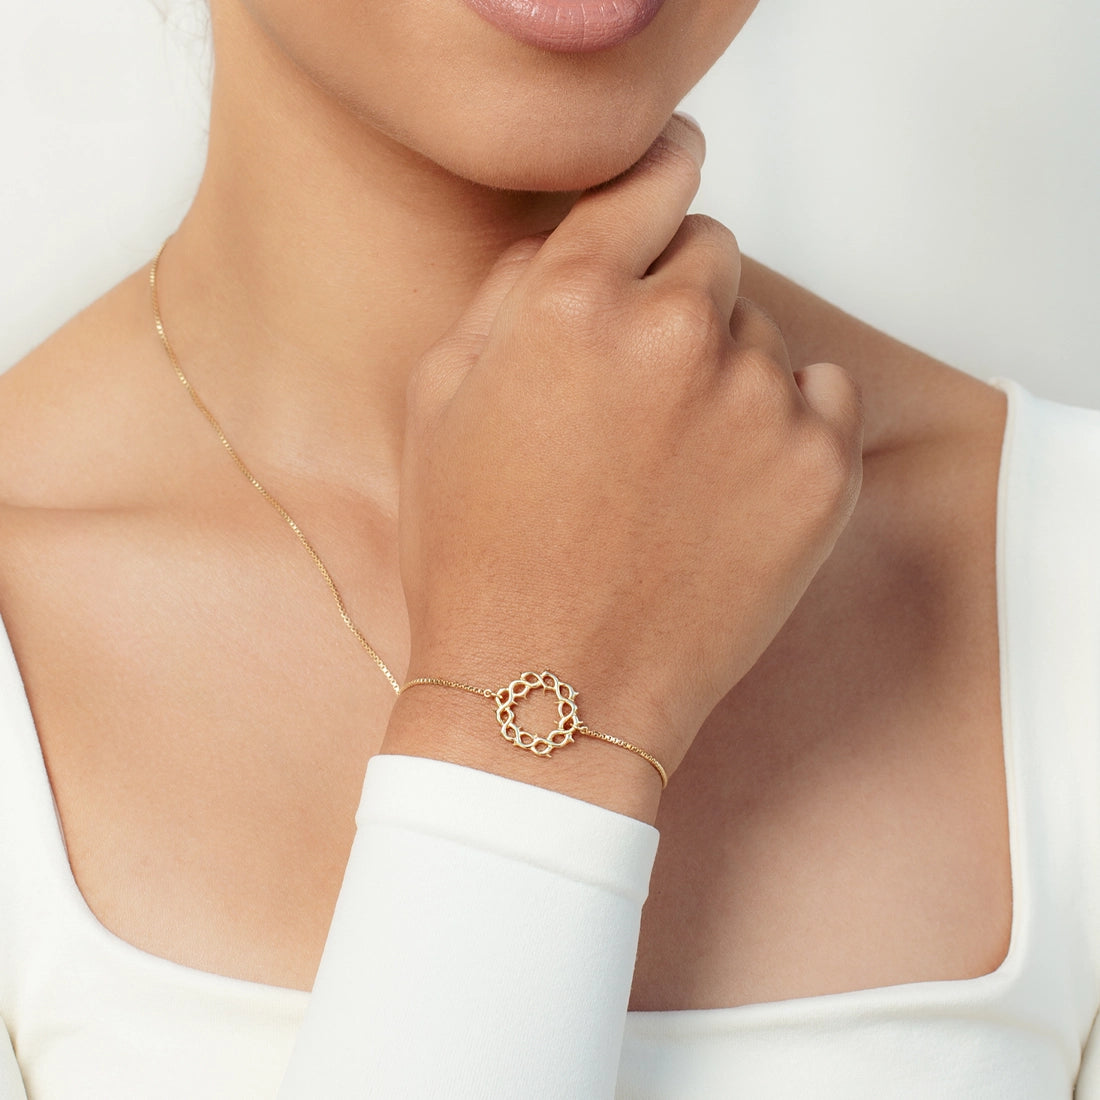 Christian woman earring gold Crown of Thorns Bracelet from the Insignia Collection by Rizen Jewelry.